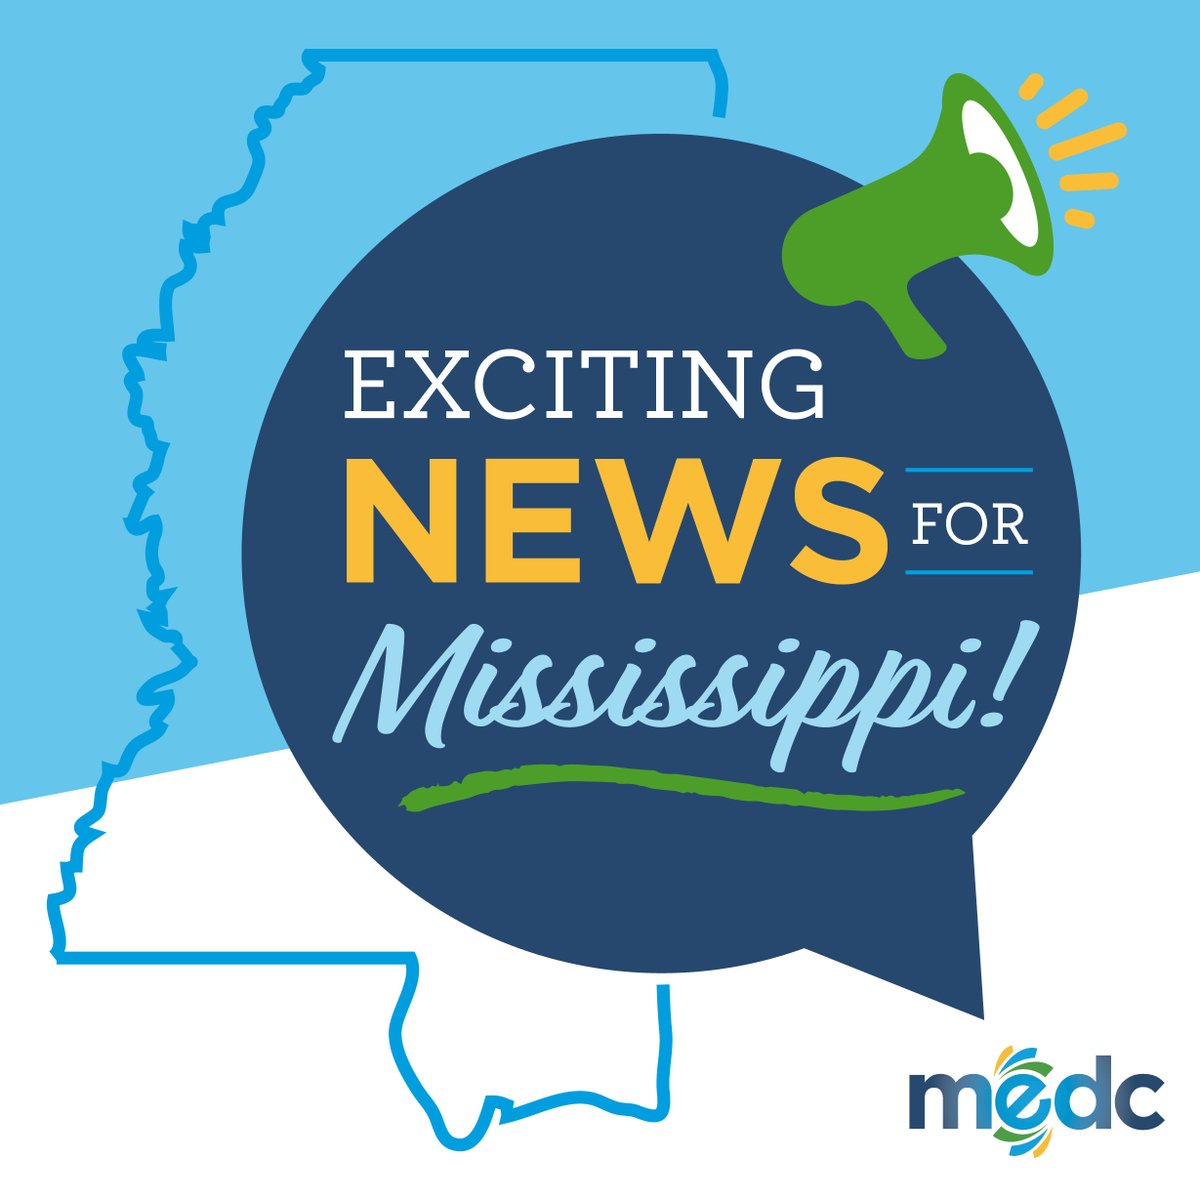 Exciting news for #Mississippi! Our state ranks 8th in the nation by the @SiteSelectionGr for the 'Best States for Manufacturing in 2023'. See how this selection process shows how we strive to be innovative and continue to grow - bit.ly/3EmjxnK